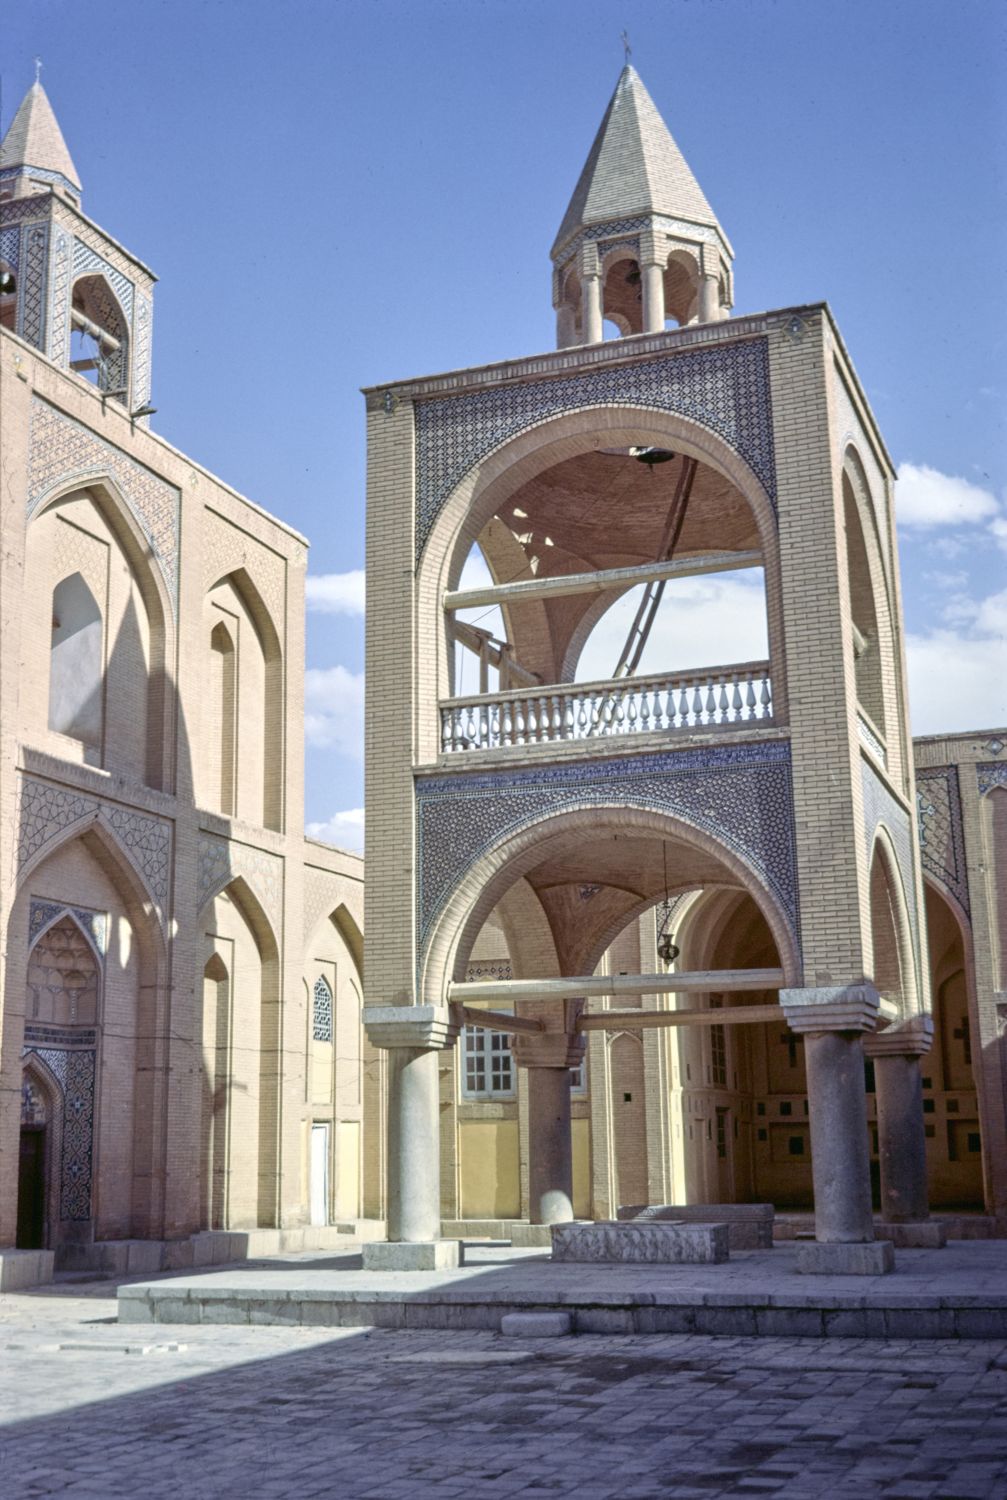 View of bell tower from courtyard.